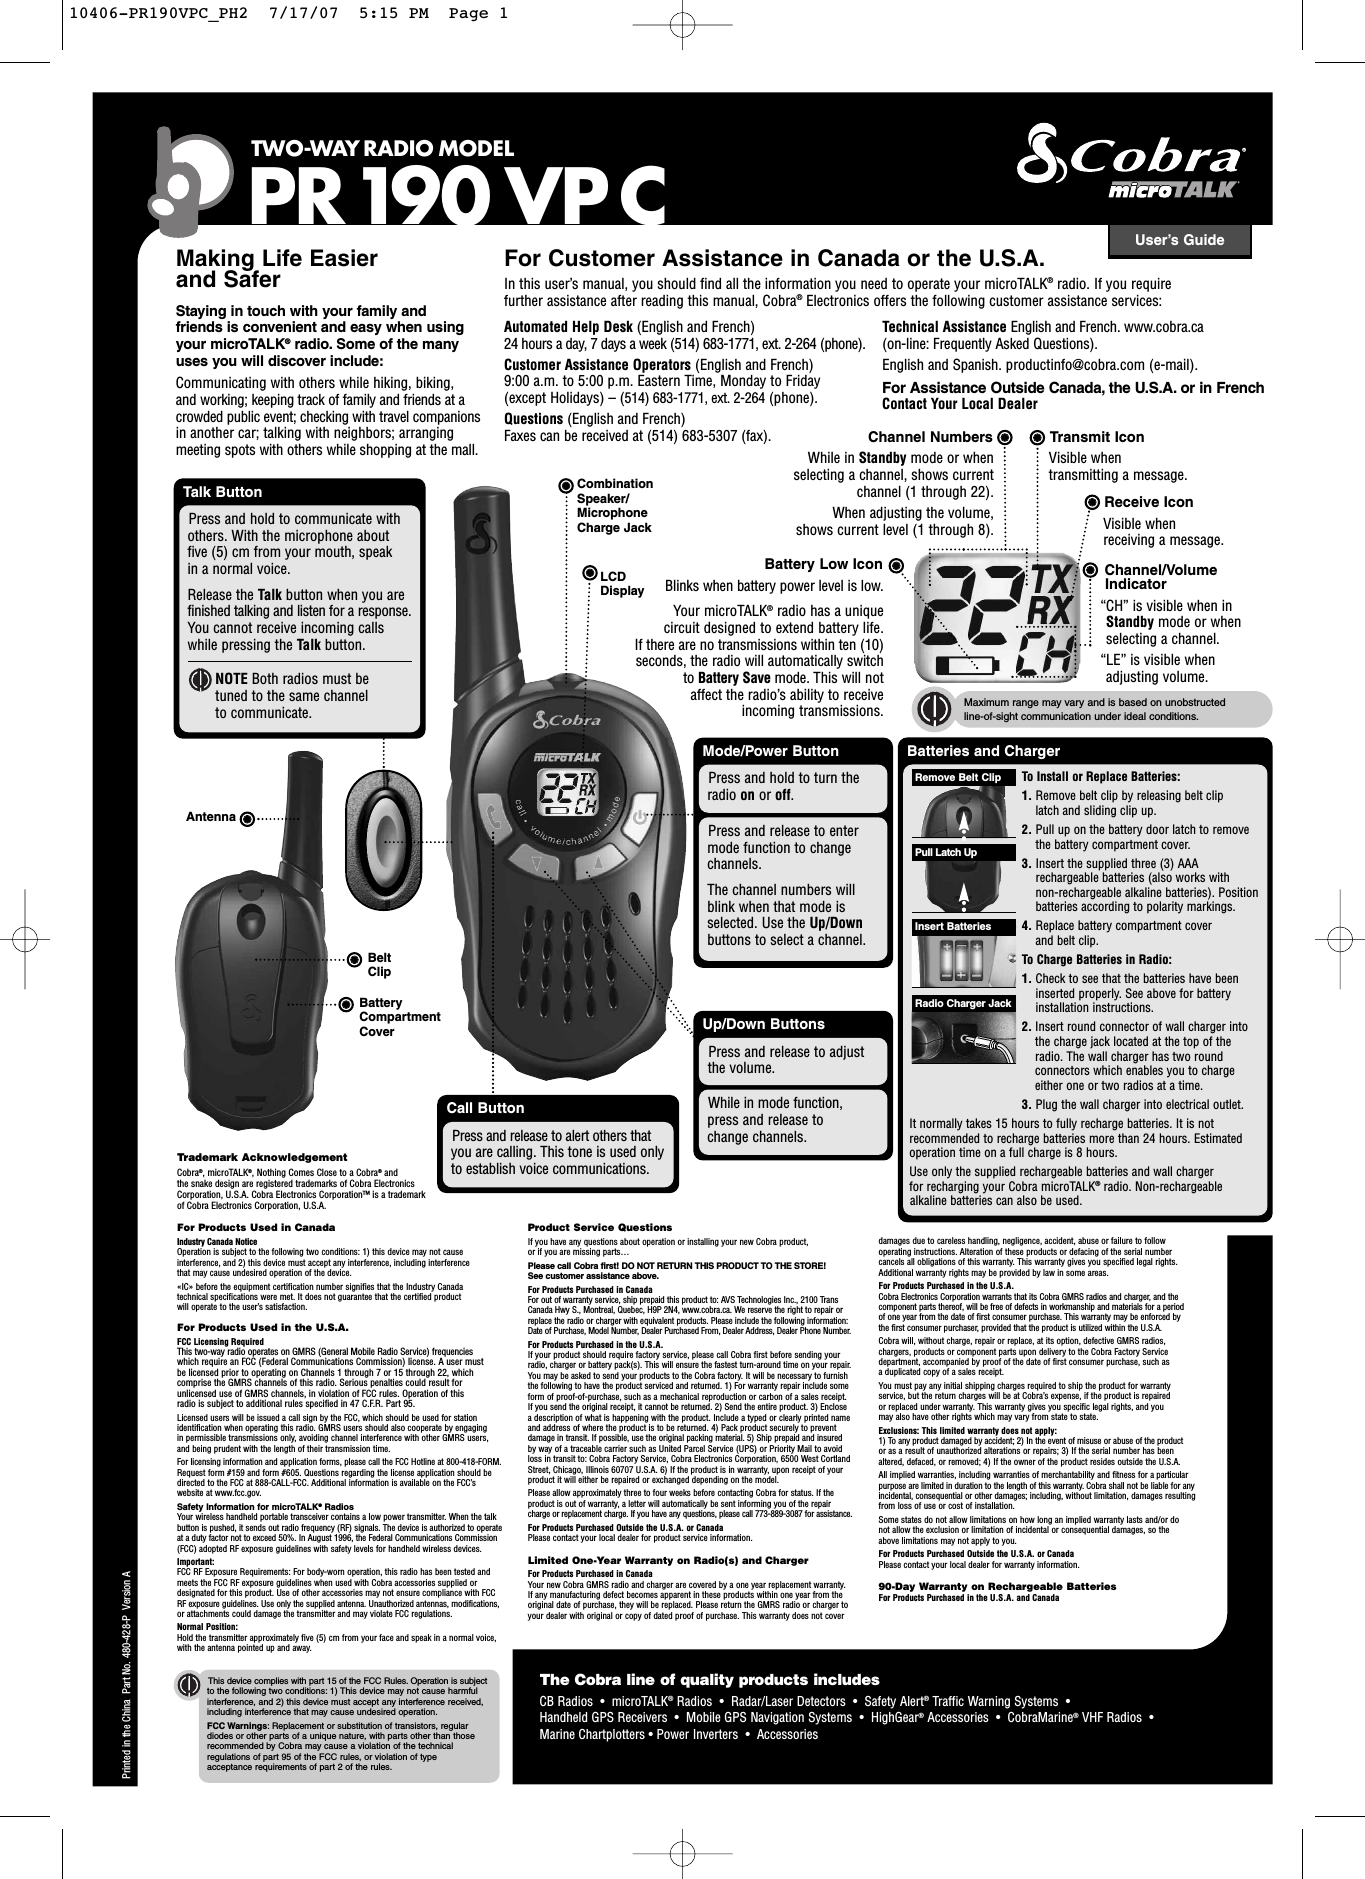 User’s GuideTWO-WAY RADIO MODEL PR190 VPCIntro Operation CustomerAssistanceWarrantyNoticeconsdary IconsPrinted in the China Part No. 480-428-P Version AMaking Life Easier and SaferStaying in touch with your family and friends is convenient and easy when usingyour microTALK®radio. Some of the many uses you will discover include:Communicating with others while hiking, biking, and working; keeping track of family and friends at acrowded public event; checking with travel companions in another car; talking with neighbors; arrangingmeeting spots with others while shopping at the mall.For Customer Assistance in Canada or the U.S.A.Inthis user’s manual, you should find all the information you need to operate your microTALK®radio. If you require further assistance after reading this manual, Cobra®Electronics offers the following customer assistance services:Automated Help Desk (English and French)24hours a day, 7 days a week (514) 683-1771, ext. 2-264 (phone). Customer Assistance Operators (English and French)9:00 a.m. to 5:00 p.m. Eastern Time, Monday to Friday (except Holidays) – (514) 683-1771, ext. 2-264 (phone). Questions (English and French)Faxes can be received at (514) 683-5307 (fax). Technical Assistance English and French. www.cobra.ca (on-line: Frequently Asked Questions). English and Spanish. productinfo@cobra.com (e-mail).For Products Used in CanadaIndustryCanada Notice Operation is subject to the following two conditions: 1) this device may not causeinterference, and 2) this device must accept any interference, including interference that may cause undesired operation of the device.«IC» before the equipment certification number signifies that the Industry Canada technical specifications were met. It does not guarantee that the certified product will operate to the user’s satisfaction.For Products Used in the U.S.A.FCC Licensing RequiredThis two-way radio operates on GMRS (General Mobile Radio Service) frequencieswhich require an FCC (Federal Communications Commission) license. A user must be licensed prior to operating on Channels 1 through 7 or 15 through 22, whichcomprise the GMRS channels of this radio. Serious penalties could result forunlicensed use of GMRS channels, in violation of FCC rules. Operation of this radio is subject to additional rules specified in 47 C.F.R. Part 95. Licensed users will be issued a call sign by the FCC, which should be used for stationidentification when operating this radio. GMRS users should also cooperate by engaging in permissible transmissions only,avoiding channel interference with other GMRS users,and being prudent with the length of their transmission time.For licensing information and application forms, please call the FCC Hotline at 800-418-FORM.Request form #159 and form #605. Questions regarding the license application should bedirected to the FCC at 888-CALL-FCC. Additional information is available on the FCC’swebsite at www.fcc.gov.Safety Information for microTALK®RadiosYour wireless handheld portable transceiver contains a low power transmitter. When the talkbutton is pushed, it sends out radio frequency (RF) signals. The device is authorized to operateat a duty factor not to exceed 50%. In August 1996, the Federal Communications Commission(FCC) adopted RF exposure guidelines with safety levels for handheld wireless devices. Important: FCC RF Exposure Requirements: For body-worn operation, this radio has been tested andmeets the FCC RF exposure guidelines when used with Cobra accessories supplied ordesignated for this product. Use of other accessories may not ensure compliance with FCCRF exposure guidelines. Use only the supplied antenna. Unauthorized antennas, modifications,or attachments could damage the transmitter and may violate FCC regulations. Normal Position: Hold the transmitter approximately five (5) cm from your face and speak in a normal voice, with the antenna pointed up and away.Product Service QuestionsIf you have any questions about operation or installing your new Cobra product, or if you are missing parts… Please call Cobra first! DO NOTRETURN THIS PRODUCT TO THE STORE! See customer assistance above.For Products Purchased in CanadaFor out of warranty service, ship prepaid this product to: AVS Technologies Inc., 2100 TransCanada Hwy S., Montreal, Quebec, H9P 2N4, www.cobra.ca. We reserve the right to repair orreplace the radio or charger with equivalent products. Please include the following information:Date of Purchase, Model Number, Dealer Purchased From, Dealer Address, Dealer Phone Number.For Products Purchased in the U.S.A.If your product should require factory service, please call Cobra first before sending yourradio, charger or batterypack(s). This will ensure the fastest turn-around time on your repair.You may be asked to send your products to the Cobra factory. It will be necessary to furnishthe following to have the product serviced and returned. 1) For warranty repair include someform of proof-of-purchase, such as a mechanical reproduction or carbon of a sales receipt.If you send the original receipt, it cannot be returned. 2) Send the entire product. 3) Encloseadescription of what is happening with the product. Include a typed or clearly printed nameand address of where the product is to be returned. 4) Pack product securely to preventdamage in transit. If possible, use the original packing material. 5) Ship prepaid and insured by way of a traceable carrier such as United Parcel Service (UPS) or Priority Mail to avoidloss in transit to: Cobra FactoryService, Cobra Electronics Corporation, 6500 West CortlandStreet, Chicago, Illinois 60707 U.S.A. 6) If the product is in warranty,upon receipt of yourproduct it will either be repaired or exchanged depending on the model. Please allow approximately three to four weeks before contacting Cobra for status. If theproduct is out of warranty, a letter will automatically be sent informing you of the repaircharge or replacement charge. If you have any questions, please call 773-889-3087 for assistance.For Products Purchased Outside the U.S.A. or CanadaPlease contact your local dealer for product service information.Limited One-Year Warranty on Radio(s) and ChargerFor Products Purchased in CanadaYour new Cobra GMRS radio and charger are covered by a one year replacement warranty. If any manufacturing defect becomes apparent in these products within one year from theoriginal date of purchase, they will be replaced. Please return the GMRS radio or charger toyour dealer with original or copy of dated proof of purchase. This warranty does not cover damages due to careless handling, negligence, accident, abuse or failure to follow operating instructions. Alteration of these products or defacing of the serial number cancels all obligations of this warranty.This warranty gives you specified legal rights.Additional warranty rights may be provided by law in some areas.For Products Purchased in the U.S.A.Cobra Electronics Corporation warrants that its Cobra GMRS radios and charger, and thecomponent parts thereof, will be free of defects in workmanship and materials for a periodof one year from the date of first consumer purchase. This warranty may be enforced by the first consumer purchaser,provided that the product is utilized within the U.S.A. Cobra will, without charge, repair or replace, at its option, defective GMRS radios, chargers, products or component parts upon delivery to the Cobra Factory Servicedepartment, accompanied by proof of the date of first consumer purchase, such as aduplicated copy of a sales receipt. You must pay any initial shipping charges required to ship the product for warranty service, but the return charges will be at Cobra’s expense, if the product is repaired or replaced under warranty. This warranty gives you specific legal rights, and you may also have other rights which may vary from state to state.Exclusions: This limited warranty does not apply:  1) To any product damaged by accident; 2) In the event of misuse or abuse of the productor as a result of unauthorized alterations or repairs; 3) If the serial number has been altered, defaced, or removed; 4) If the owner of the product resides outside the U.S.A.All implied warranties, including warranties of merchantability and fitness for a particularpurpose are limited in duration to the length of this warranty.Cobra shall not be liable for anyincidental, consequential or other damages; including, without limitation, damages resultingfrom loss of use or cost of installation. Some states do not allow limitations on how long an implied warranty lasts and/or do not allow the exclusion or limitation of incidental or consequential damages, so the above limitations may not apply to you.For Products Purchased Outside the U.S.A. or CanadaPlease contact your local dealer for warranty information.90-Day Warranty on Rechargeable BatteriesFor Products Purchased in the U.S.A. and CanadaThis device complies with part 15 of the FCC Rules. Operation is subjectto the following two conditions: 1) This device may not cause harmfulinterference, and 2) this device must accept any interference received,including interference that may cause undesired operation.FCC Warnings:Replacement or substitution of transistors,regulardiodes or other parts of a unique nature, with parts other than thoserecommended byCobramaycause a violation of the technicalregulations of part95 of the FCC rules,or violation of type acceptance requirements of part 2 of the rules.Trademark AcknowledgementCobra®,microTALK®,Nothing Comes Close to a Cobra®and the snake design are registered trademarks of Cobra Electronics Corporation, U.S.A. Cobra Electronics Corporation™ is a trademark of Cobra Electronics Corporation, U.S.A. Mode/Power ButtonPress and release to entermode function to changechannels.The channel numbers willblink when that mode isselected. Use the Up/Downbuttons to select a channel.CombinationSpeaker/MicrophoneCharge JackPress and hold to turn theradio on or off.Up/Down ButtonsWhile in mode function,press and release to change channels.Press and release to adjustthe volume.Channel NumbersWhile in Standby mode or when selecting a channel, shows current channel (1 through 22).When adjusting the volume, shows current level (1 through 8).Channel/Volume Indicator“CH” is visible when inStandby mode or whenselecting a channel.“LE” is visible when adjusting volume.Receive IconVisible when receiving a message.Transmit IconVisible when transmitting a message.Battery Low IconBlinks when battery power level is low.Your microTALK®radio has a unique circuit designed to extend battery life. Ifthere are no transmissions within ten (10)seconds, the radio will automatically switch to Battery Save mode. This will not affect the radio’s ability to receive incoming transmissions.BatteryCompartmentCoverBeltClipAntennaTalk ButtonPress and hold to communicate withothers. With the microphone aboutfive (5) cm from your mouth, speak in a normal voice. Release the Talk button when you arefinished talking and listen for a response.You cannot receive incoming callswhile pressing the Talk button.NOTE Both radios must be tuned to the same channel tocommunicate.Intro Operation CustomerAssistanceWarrantyNoticeMain IconsSecondary IconsIntro Operation CustomerAssistanceWarrantyNoticeMain IconsSecondary IconsMaximum range may vary and is based on unobstructed line-of-sight communication under ideal conditions.LCDDisplayBatteries and ChargerTo Install or Replace Batteries:1. Remove belt clip by releasing belt clip latch and sliding clip up.2. Pull up on the battery door latch to removethe battery compartment cover.3. Insert the supplied three (3) AAArechargeable batteries (also works with non-rechargeable alkaline batteries). Positionbatteries according to polarity markings.4. Replace battery compartment cover and belt clip.To Charge Batteries in Radio:1. Check to see that the batteries have beeninserted properly. See above for batteryinstallation instructions.2. Insert round connector of wall charger intothe charge jack located at the top of theradio. The wall charger has two roundconnectors which enables you to chargeeither one or two radios at a time.3. Plug the wall charger into electrical outlet.It normally takes 15 hours to fully recharge batteries. It is notrecommended to recharge batteries more than 24 hours. Estimatedoperation time on a full charge is 8 hours.Use only the supplied rechargeable batteries and wall charger for recharging your Cobra microTALK®radio. Non-rechargeablealkaline batteries can also be used.InsertBatteriesPull Latch UpRemove Belt ClipRadio Charger JackFor Assistance Outside Canada, the U.S.A. or in FrenchContact Your Local DealerThe Cobra line of quality products includesCB Radios  •  microTALK®Radios  •  Radar/Laser Detectors  •  Safety Alert®Traffic Warning Systems  •  Handheld GPS Receivers  •  Mobile GPS Navigation Systems  •  HighGear®Accessories  •  CobraMarine®VHF Radios  •  Marine Chartplotters • Power Inverters  •  AccessoriesIntro Operation CustomerAssistanceWarrantyNoticeMain IconsSecondary IconsCall ButtonPress and release to alert others thatyou are calling. This tone is used onlyto establish voice communications.10406-PR190VPC_PH2  7/17/07  5:15 PM  Page 1